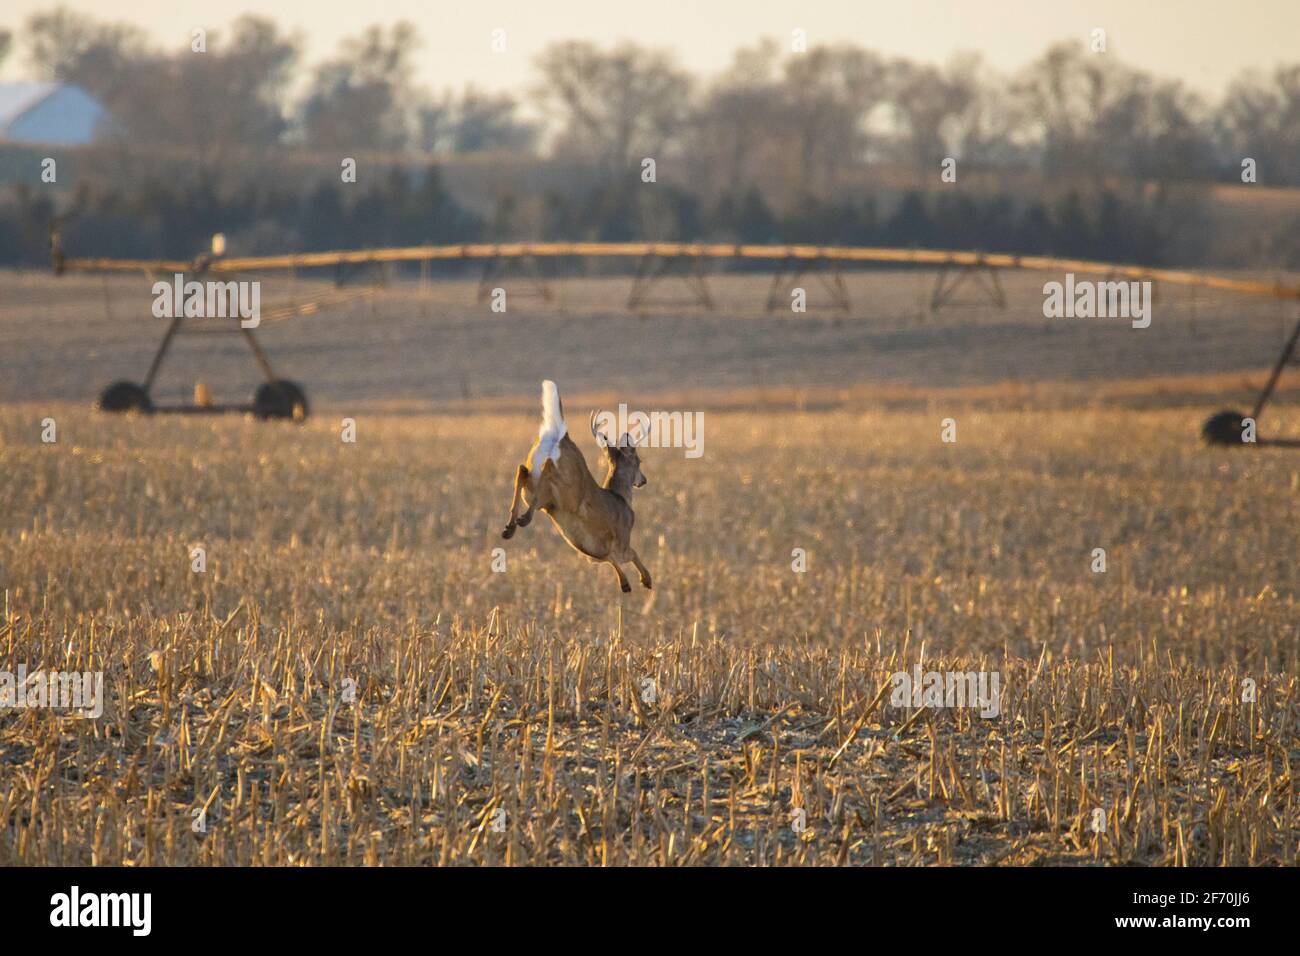 A buck whitetail deer runs across a harvested cornfield in north eastern South Dakota.  A field irrigator and woods is in the background. Stock Photo